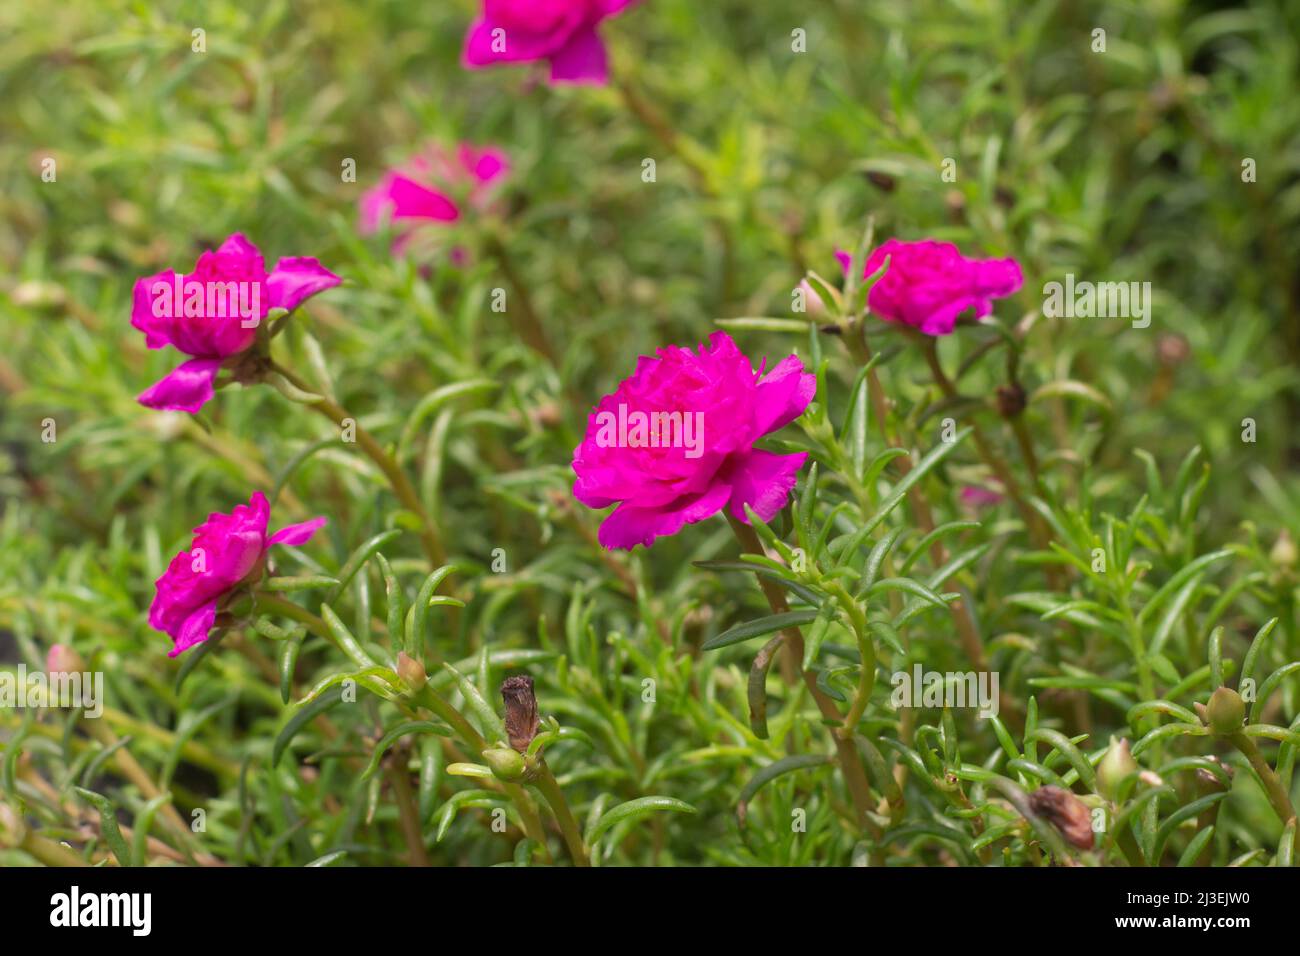 Full frame view of portulaca grandiflora or moss-rose purslane, a succulent flower plant often cultivated in gardens. Stock Photo